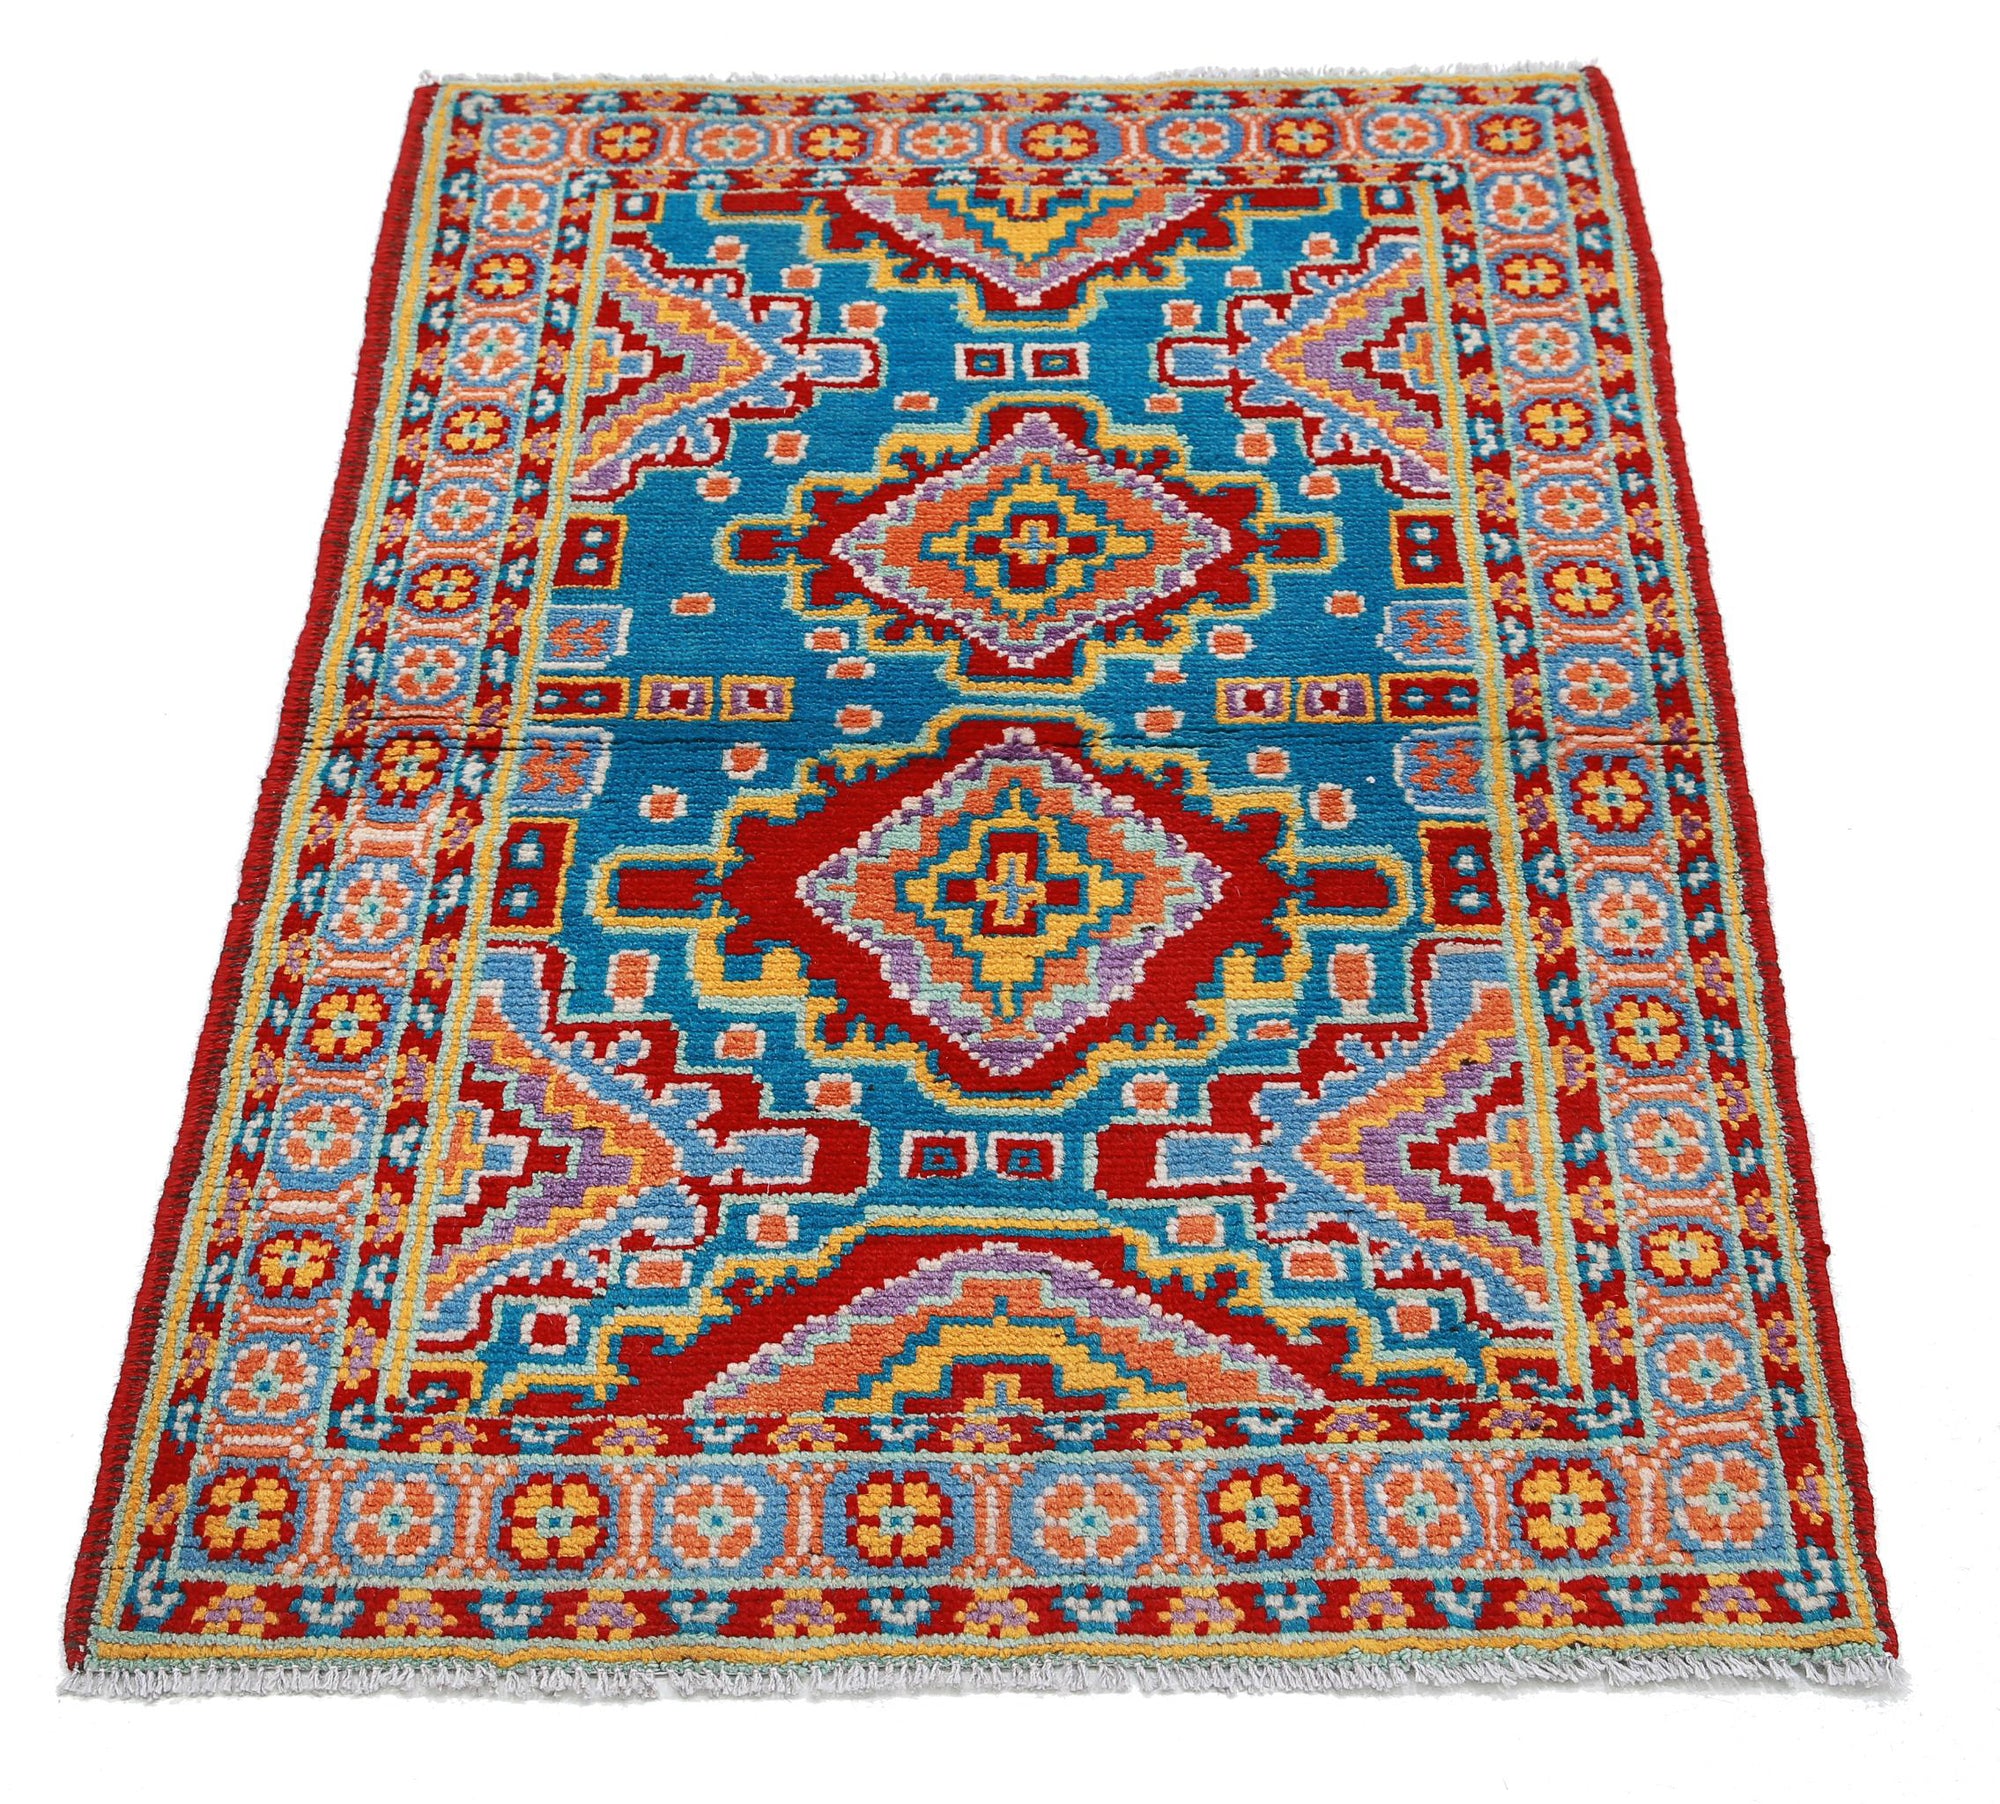 Revival-hand-knotted-qarghani-wool-rug-5014008-3.jpg